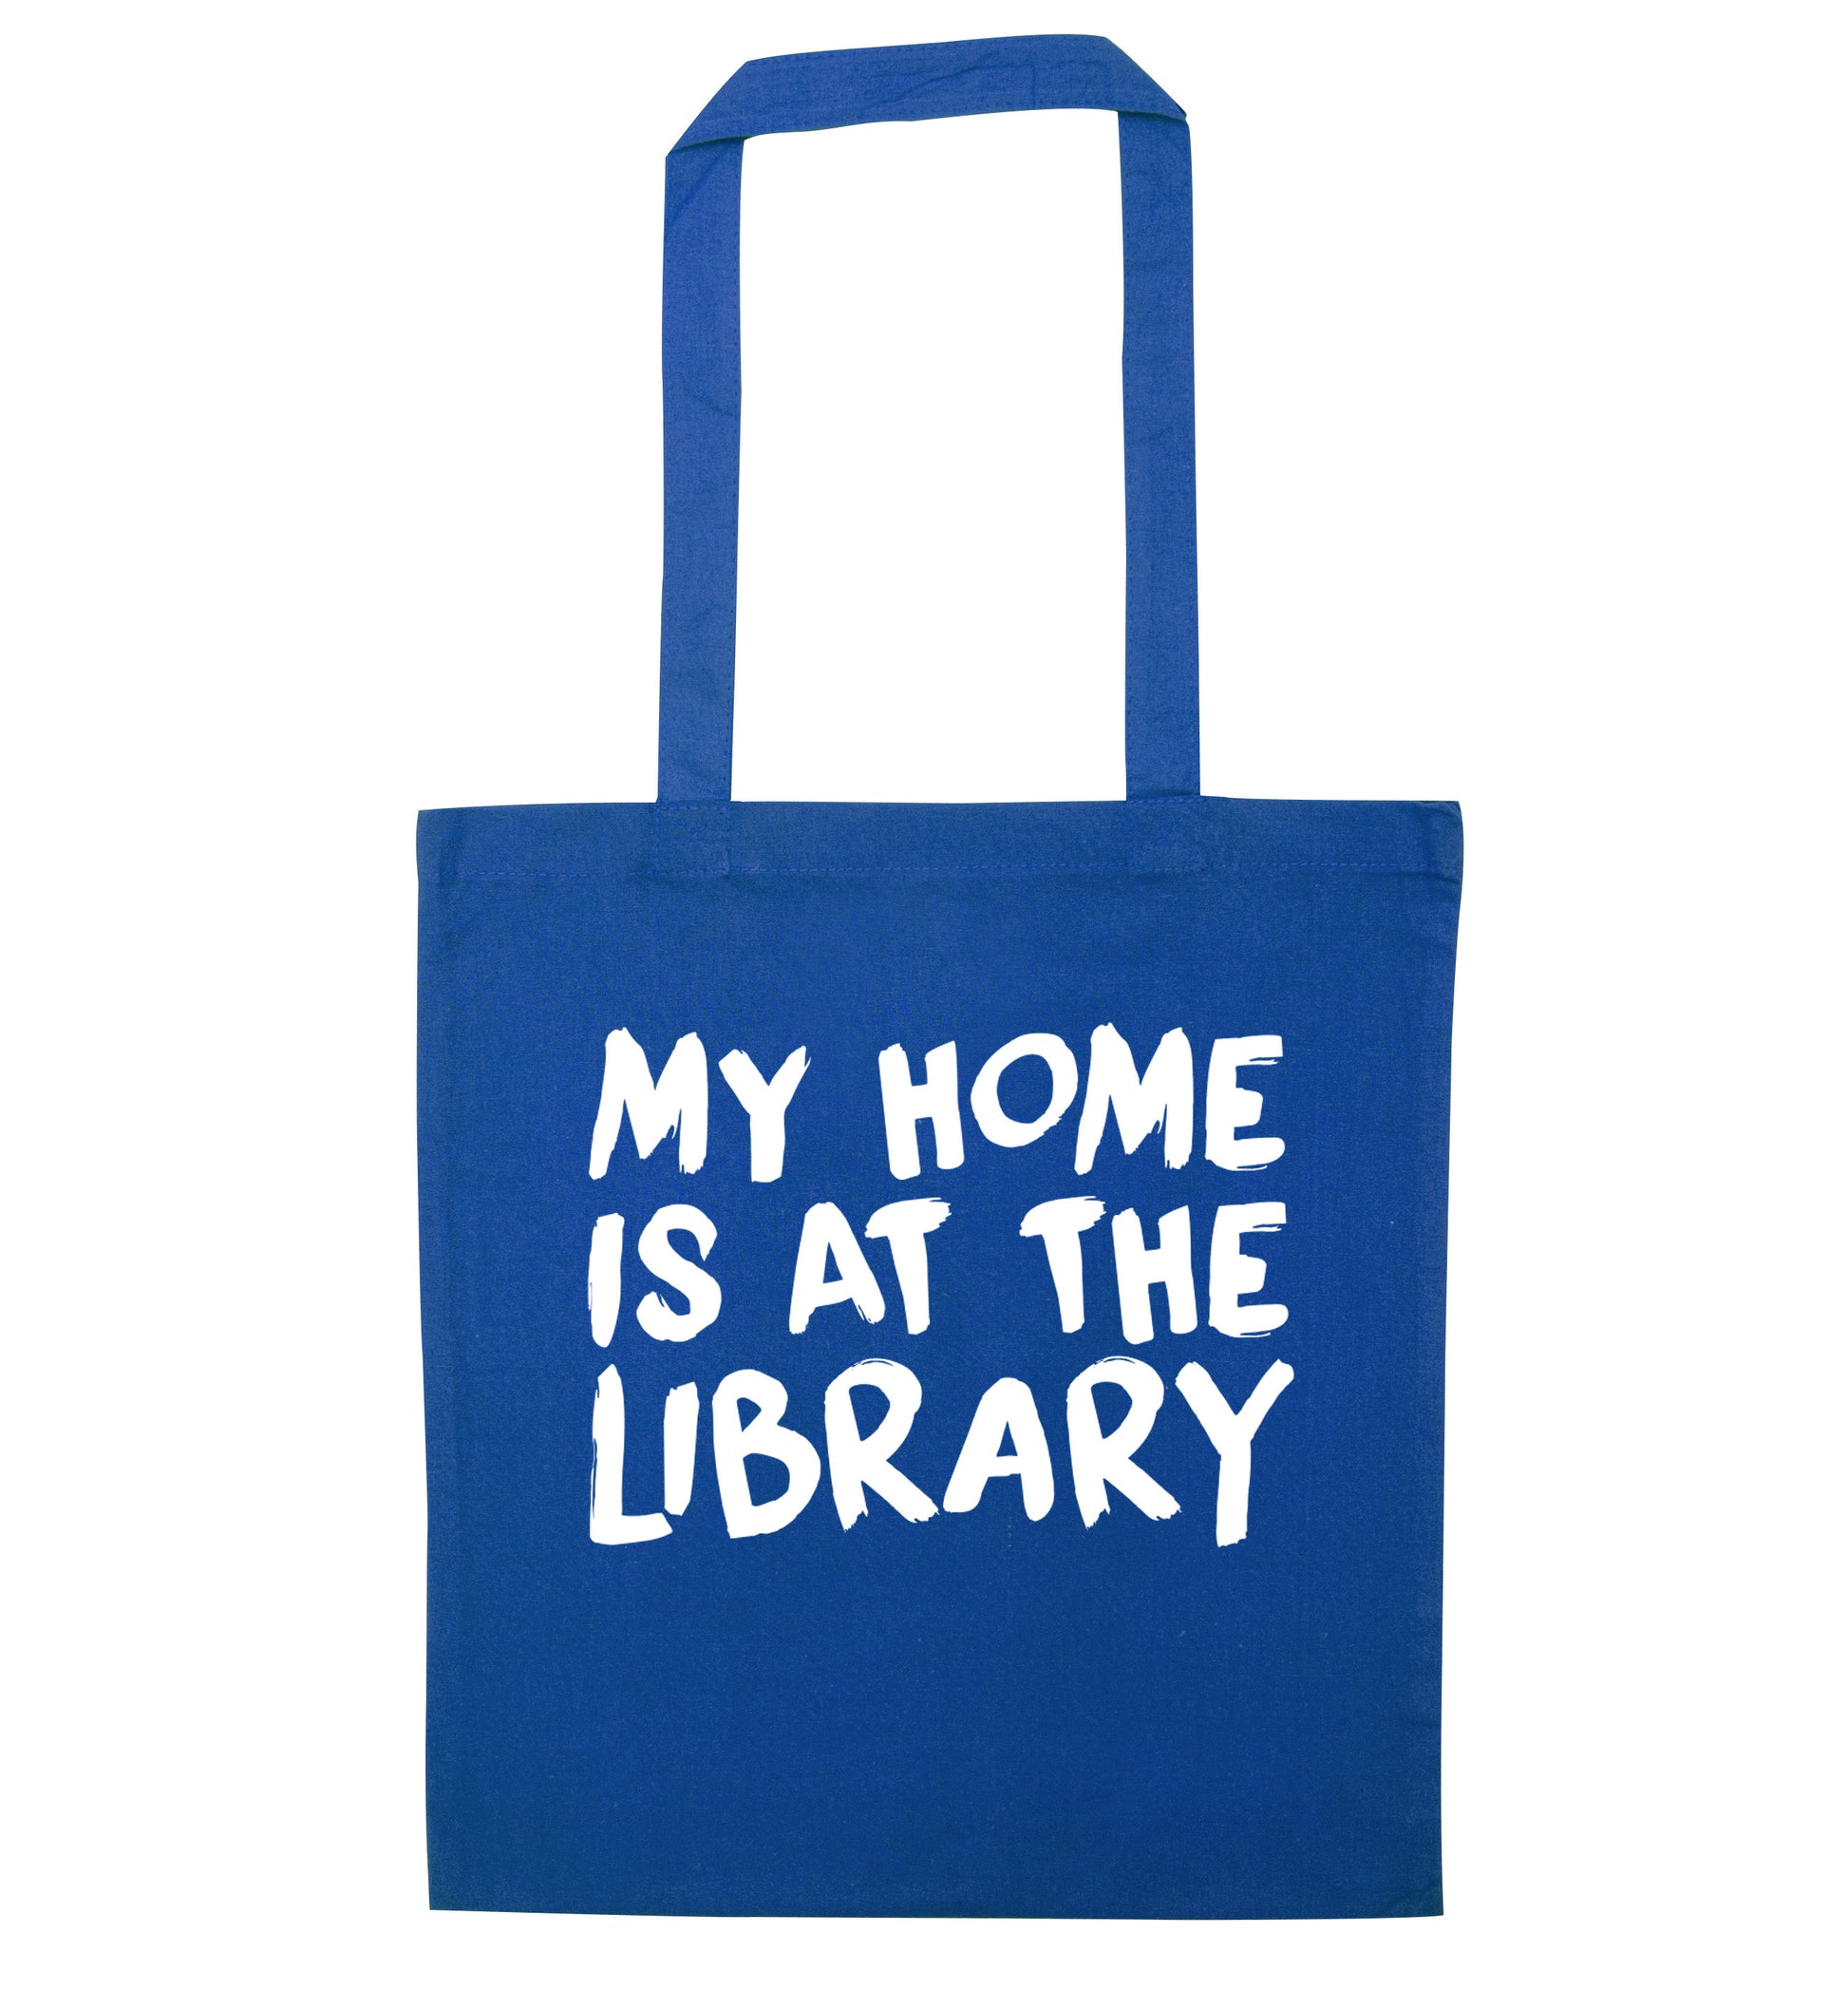 My home is at the library blue tote bag